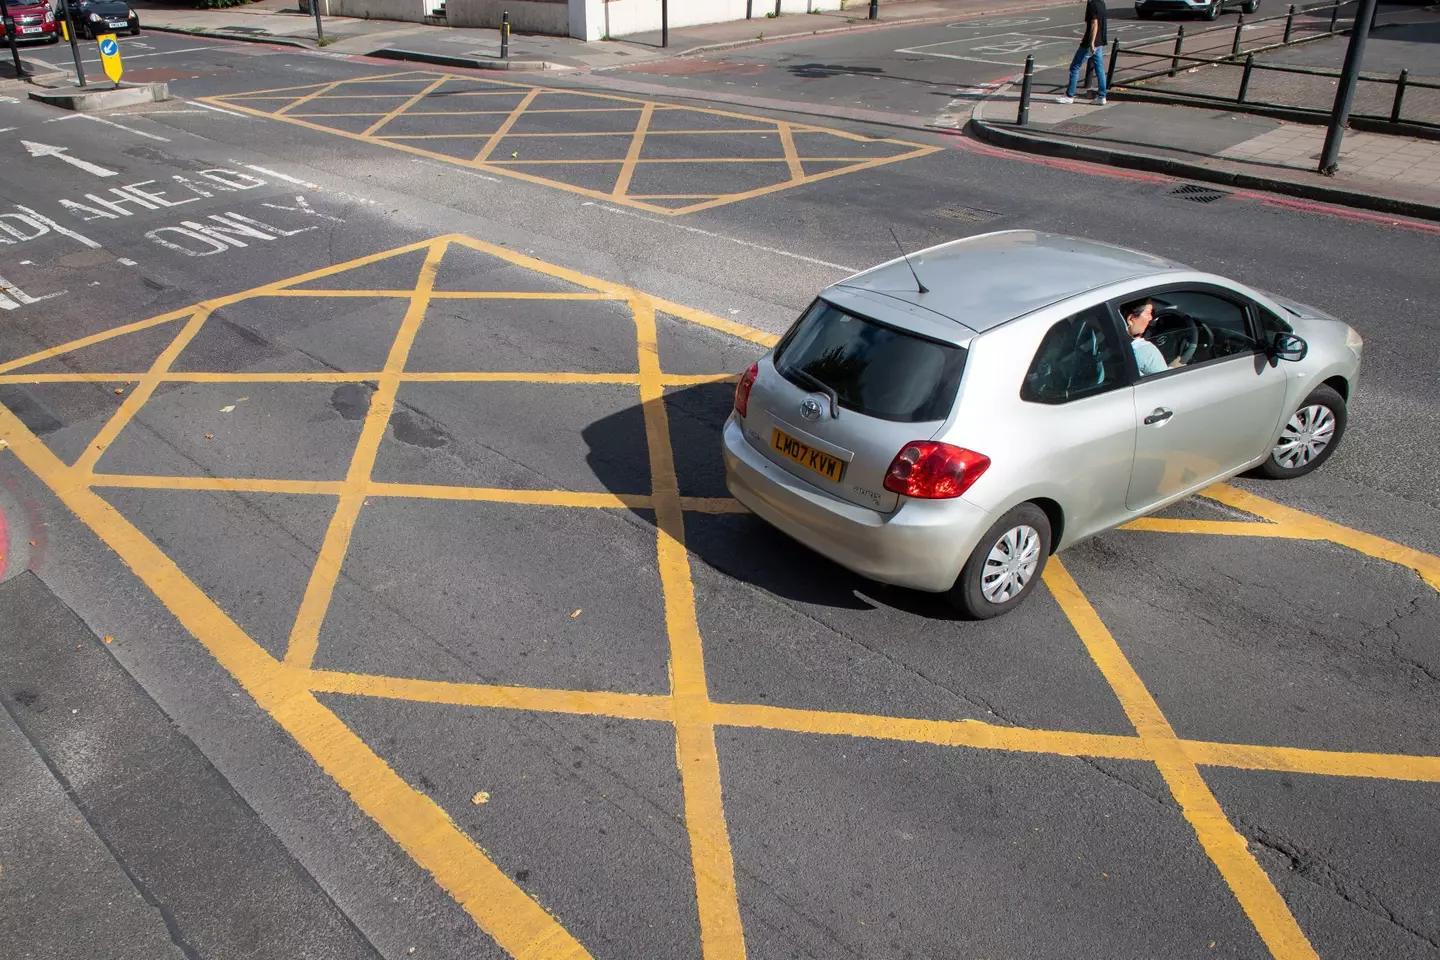 Stopping too long in a yellow box junction could see you slapped with a £1,000 fine.